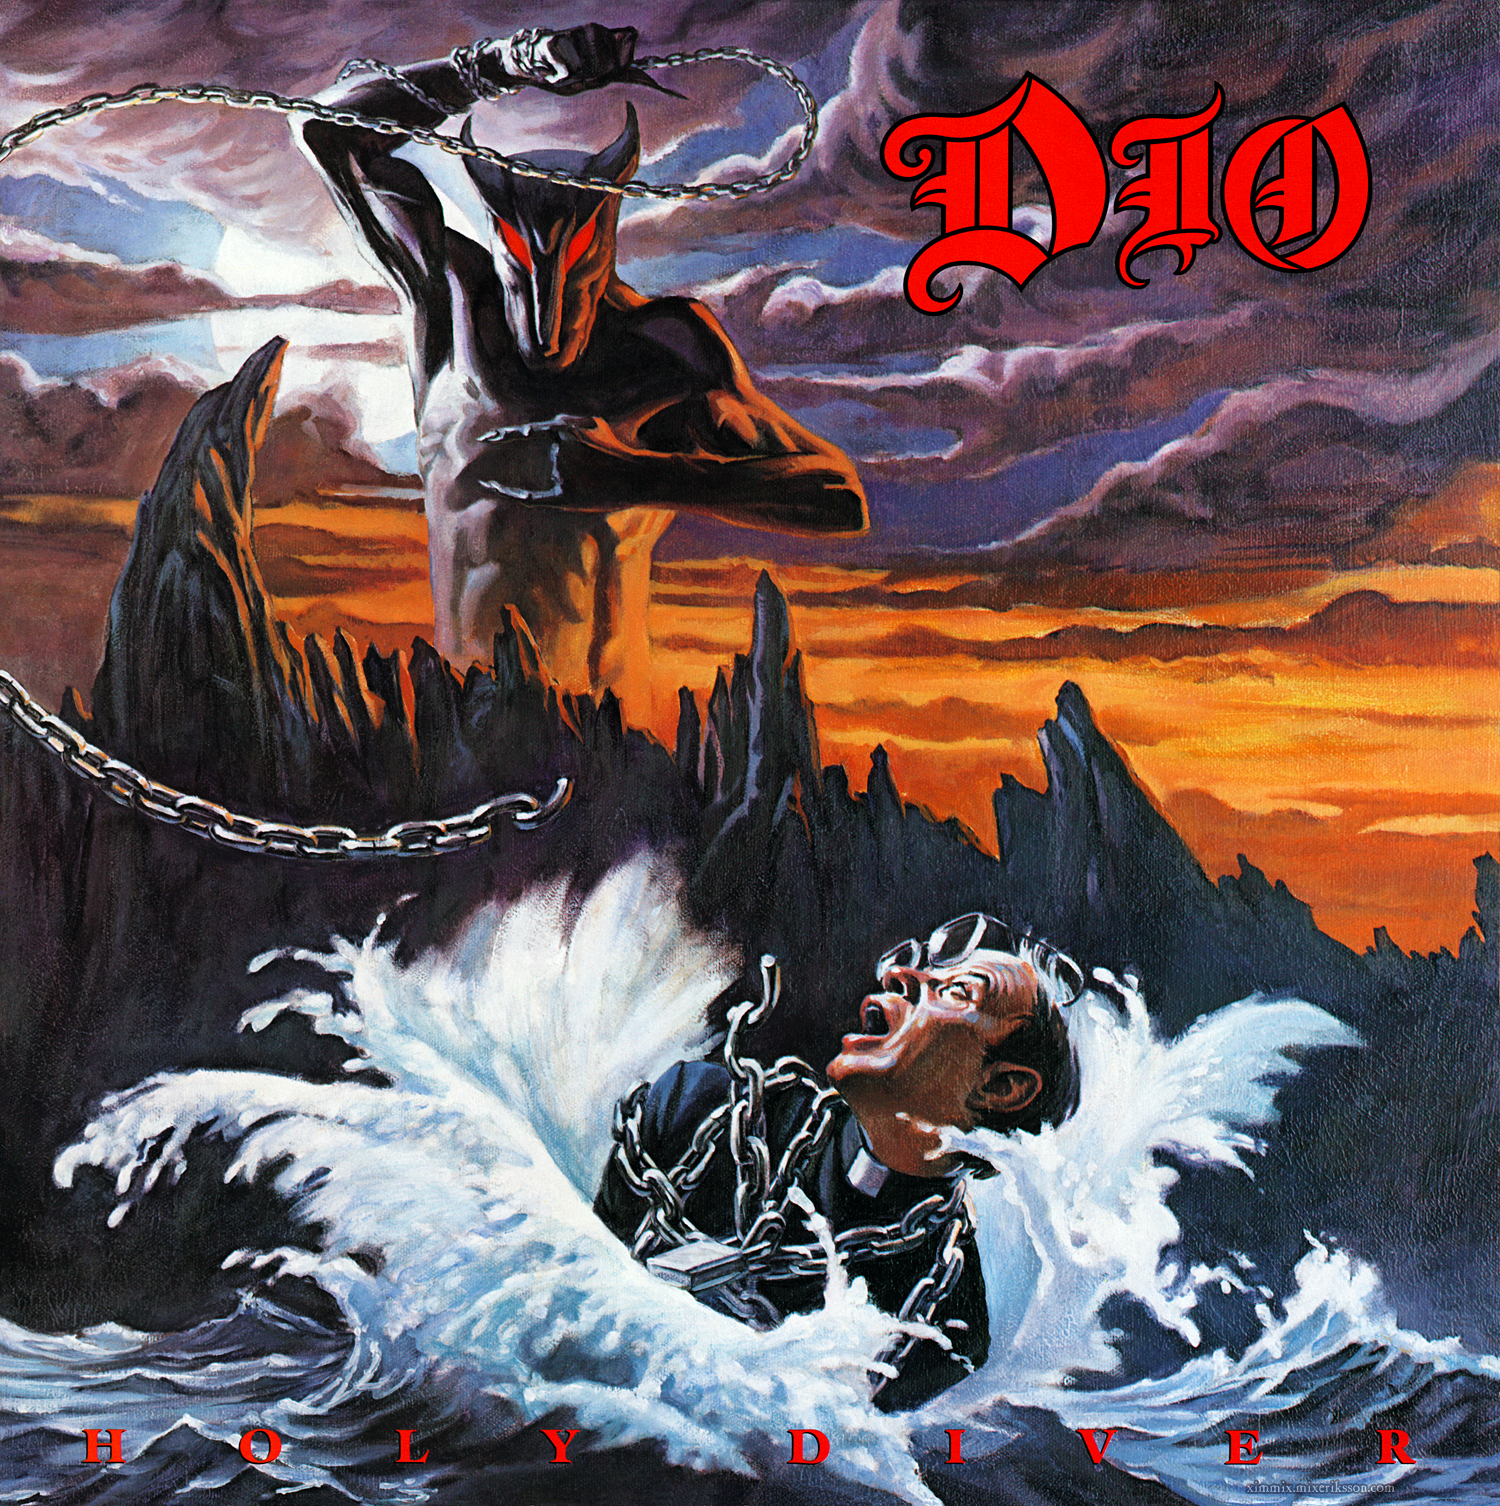 Vol 1, Track 10: ”Holy Diver” by Dio